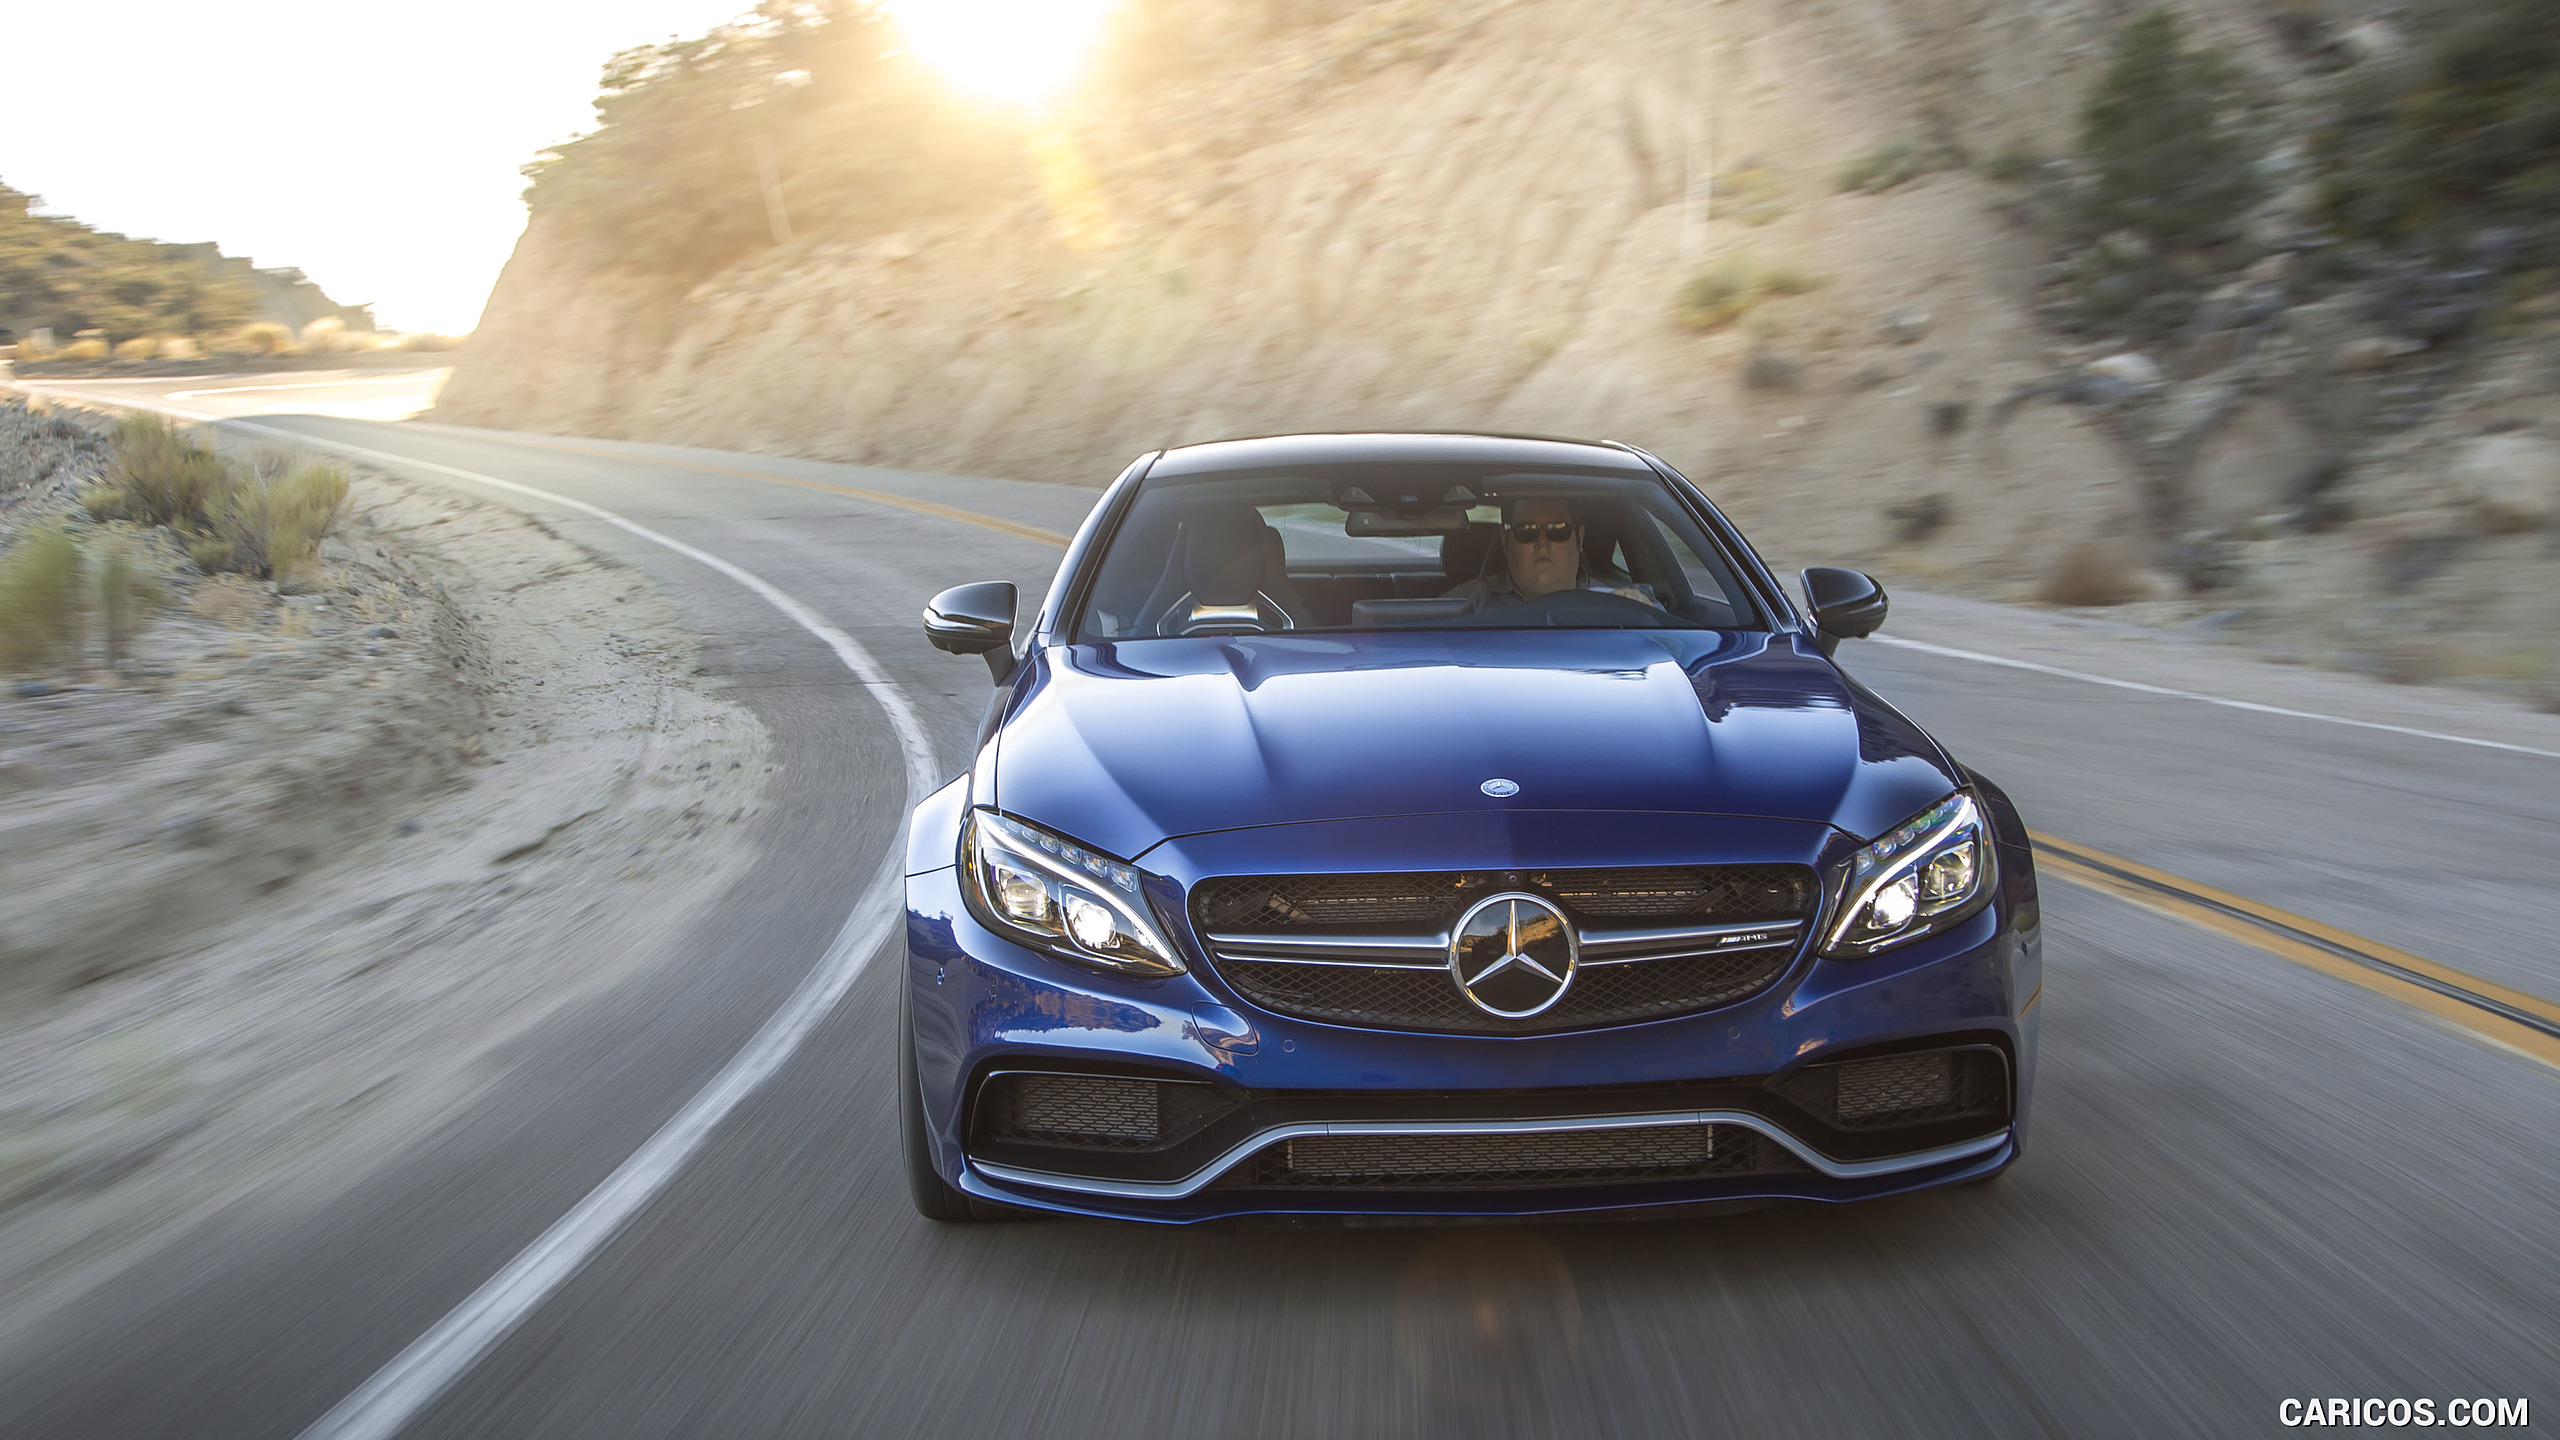 2017 Mercedes-AMG C63 S Coupe (US-Spec) - Front, #47 of 107